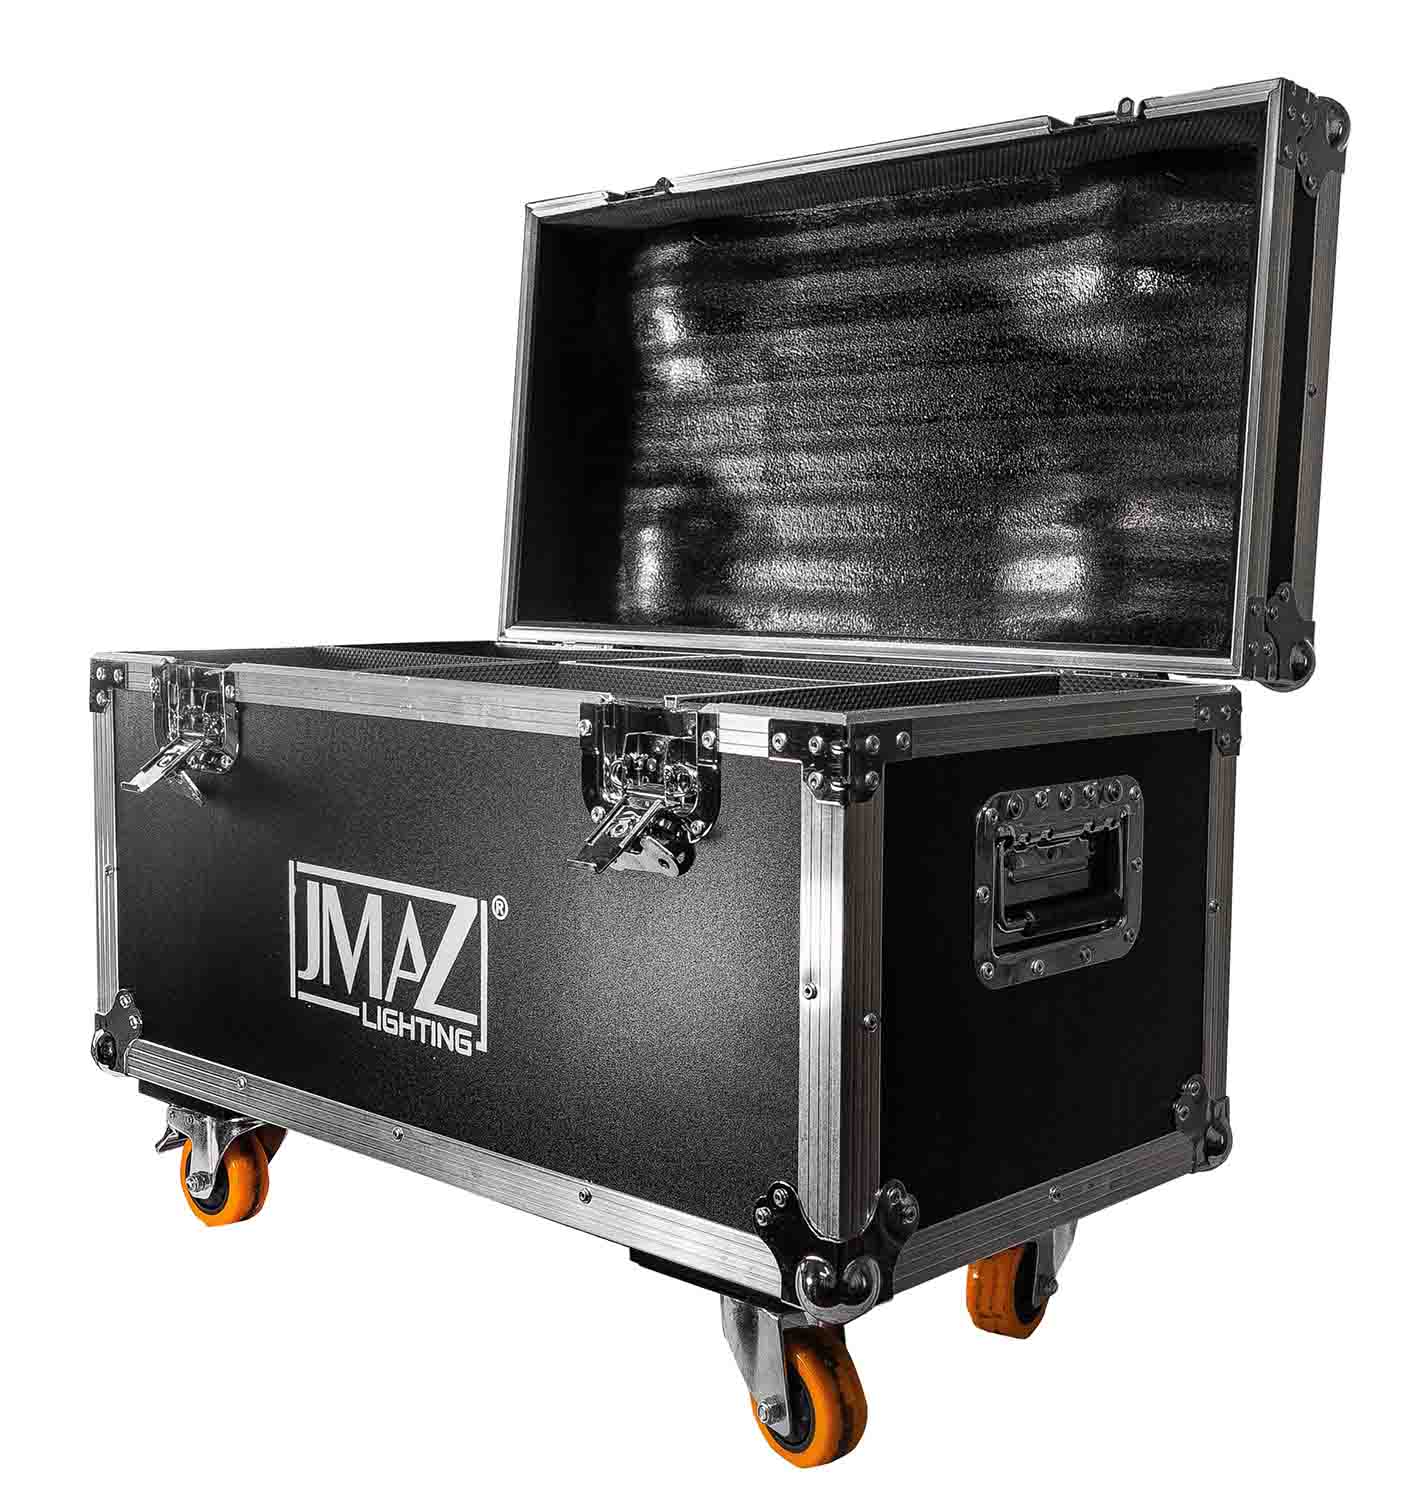 JMAZ 4-Unit Road Case for Attco 100 Series Moving Heads - Hollywood DJ